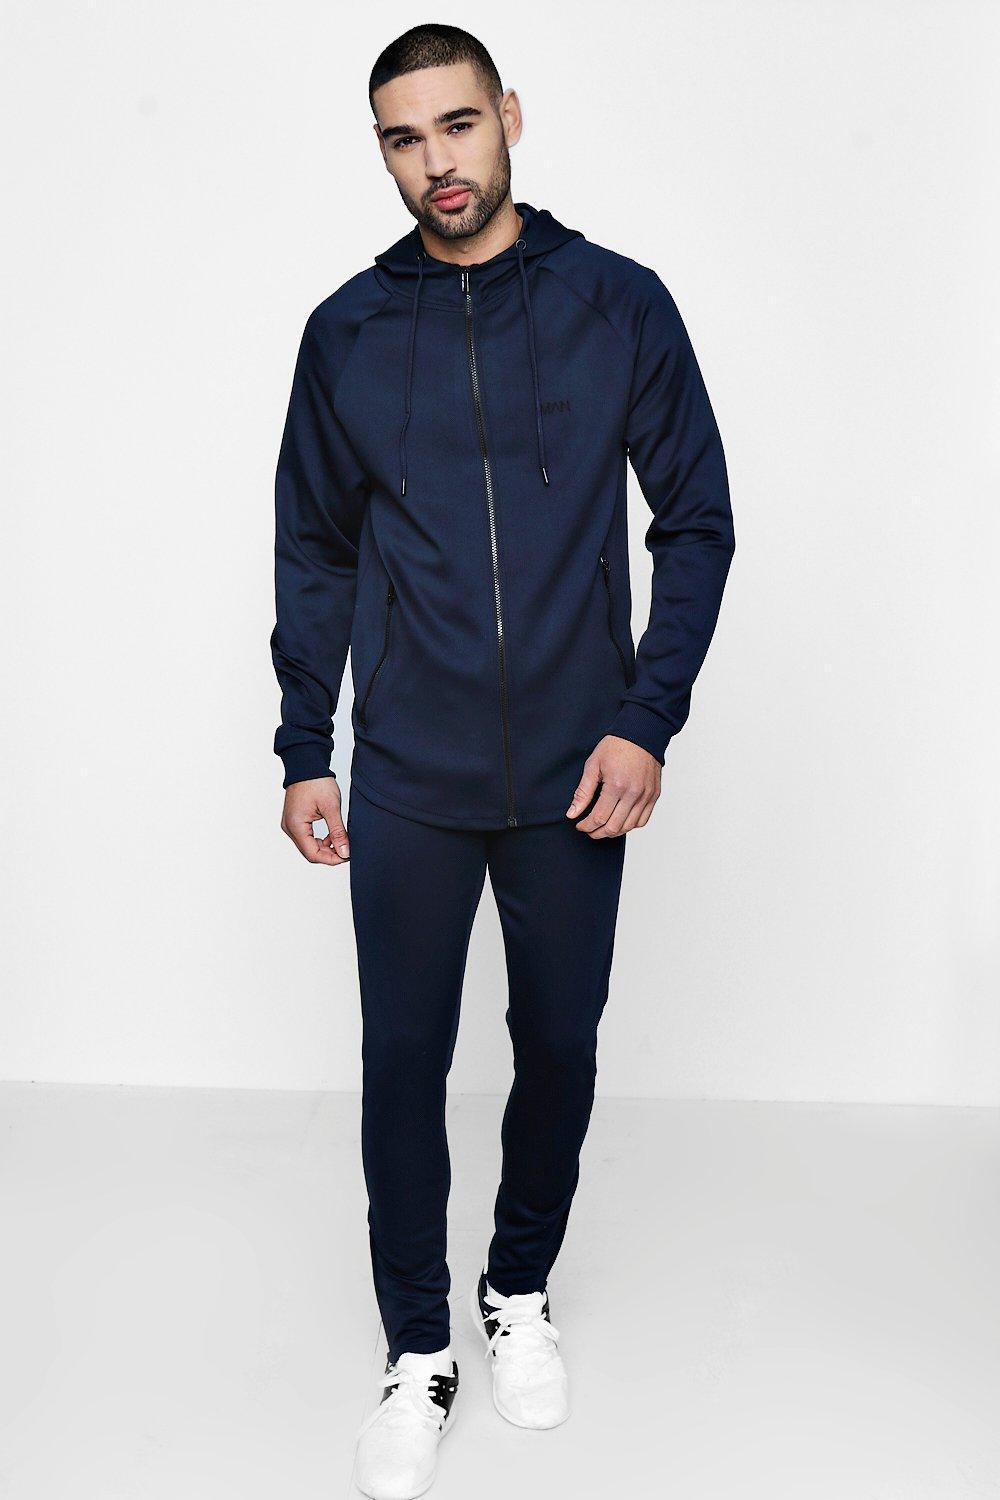 Boohoo Skinny Fit Man Tracksuit In Tricot in Blue for Men - Lyst